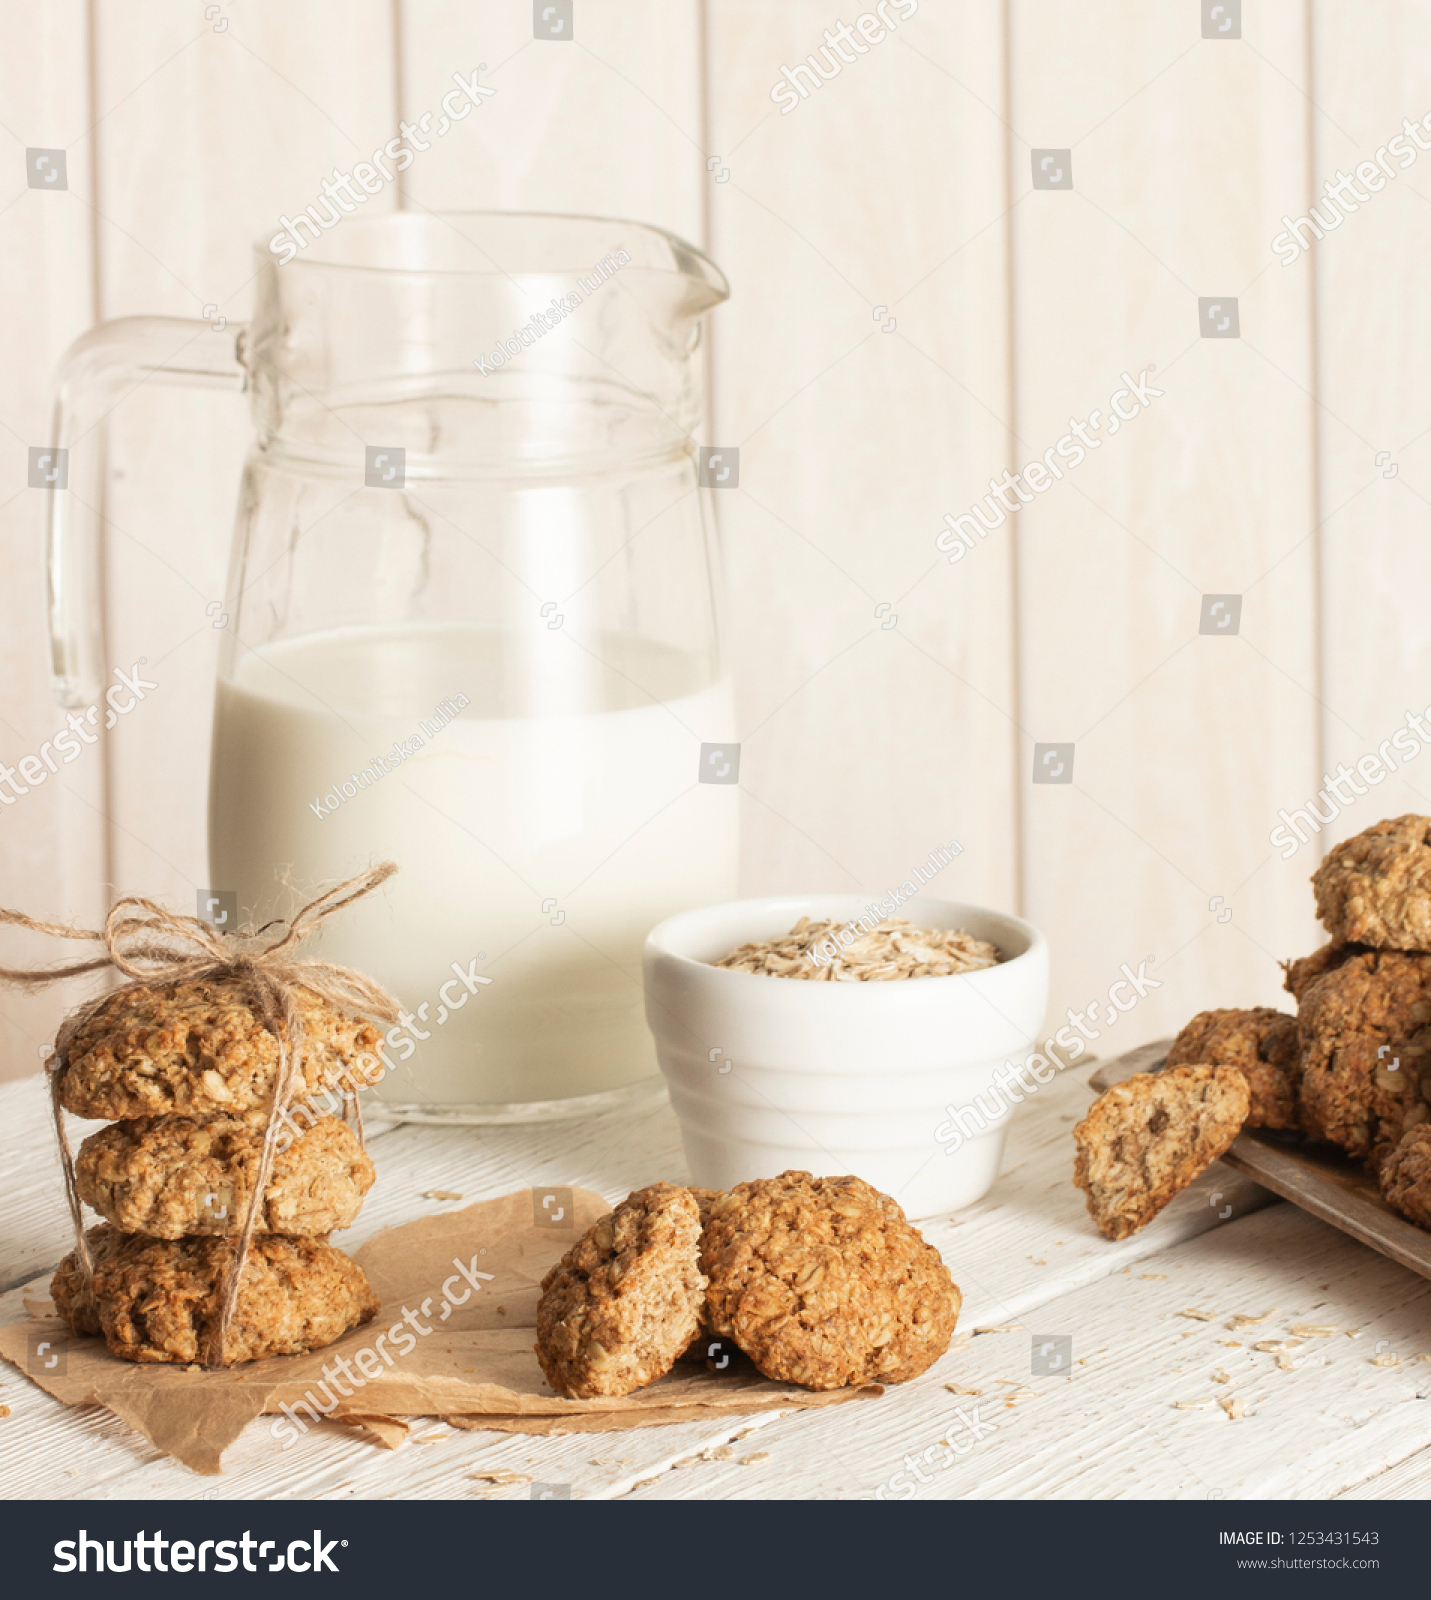 Oatmeal cookies with milk on tray on rustic wooden table #1253431543